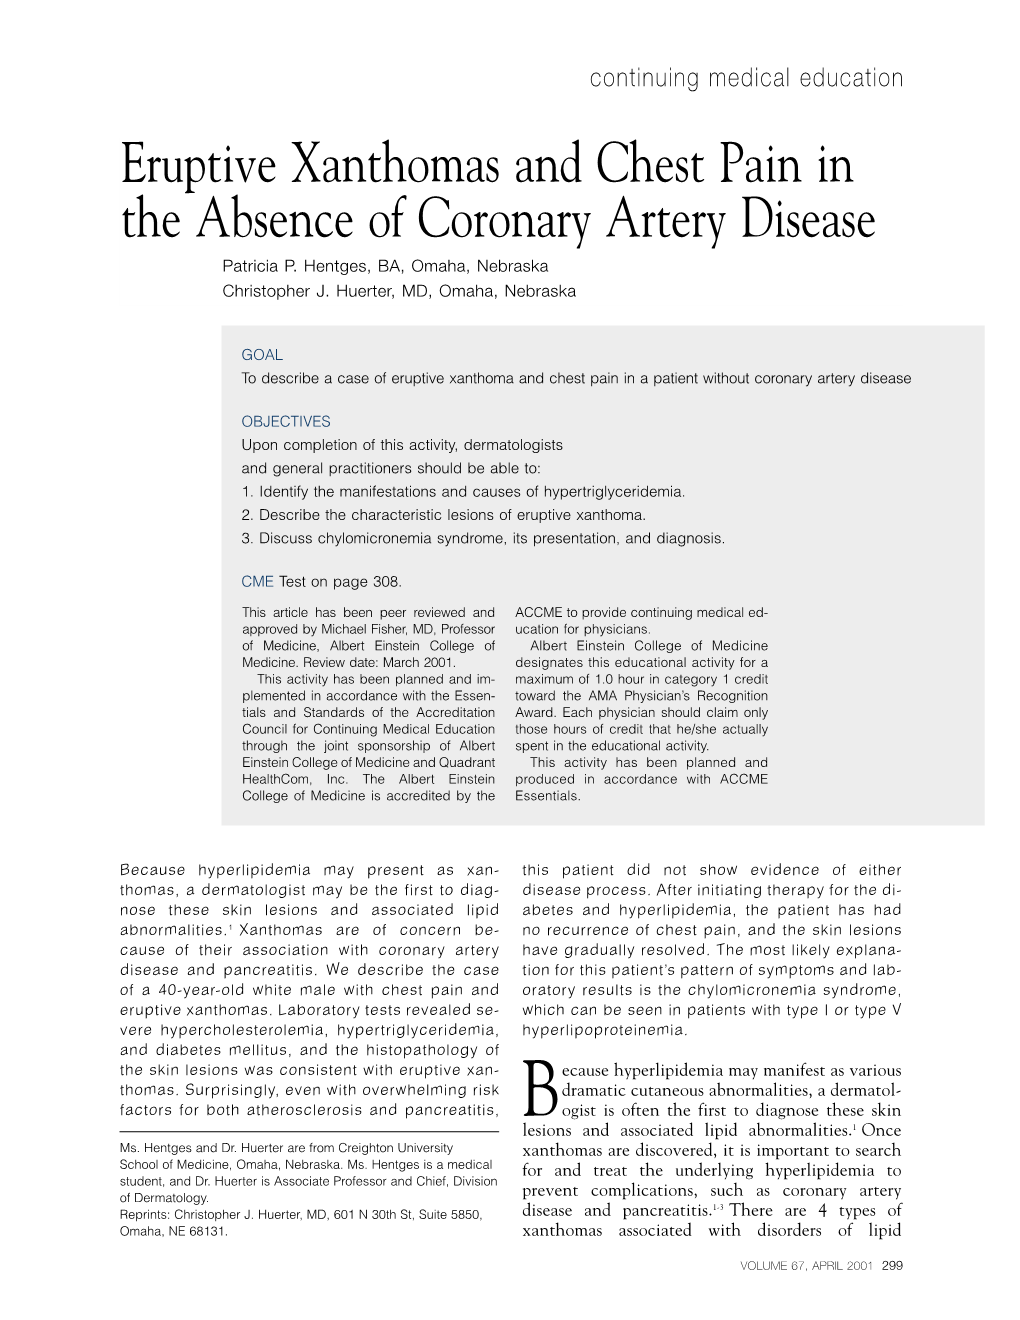 Eruptive Xanthomas and Chest Pain in the Absence of Coronary Artery Disease Patricia P